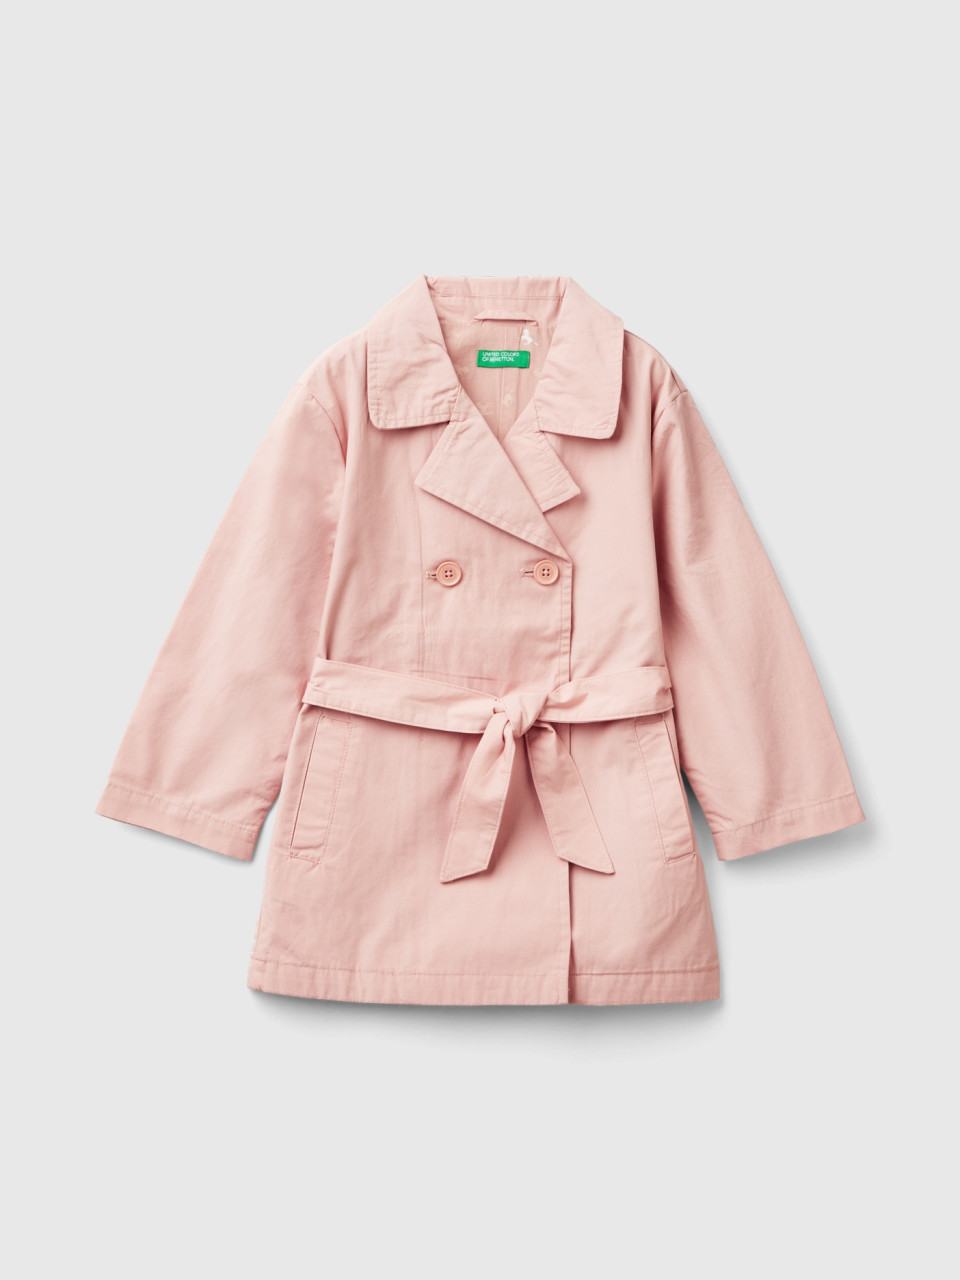 Benetton, Double-breasted Trench Coat, Soft Pink, Kids